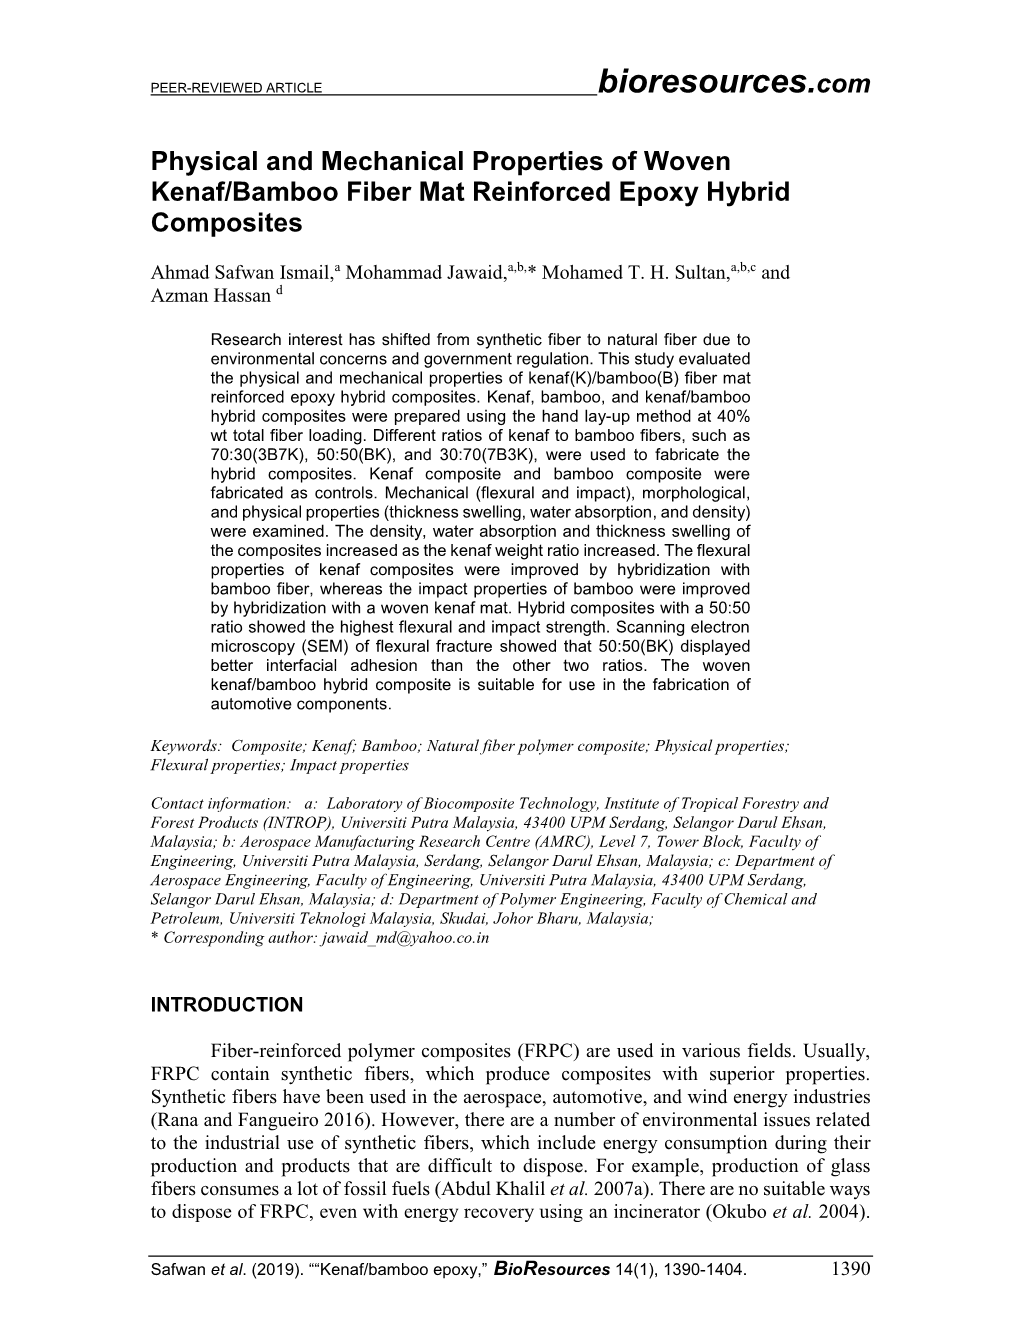 Physical and Mechanical Properties of Woven Kenaf/Bamboo Fiber Mat Reinforced Epoxy Hybrid Composites